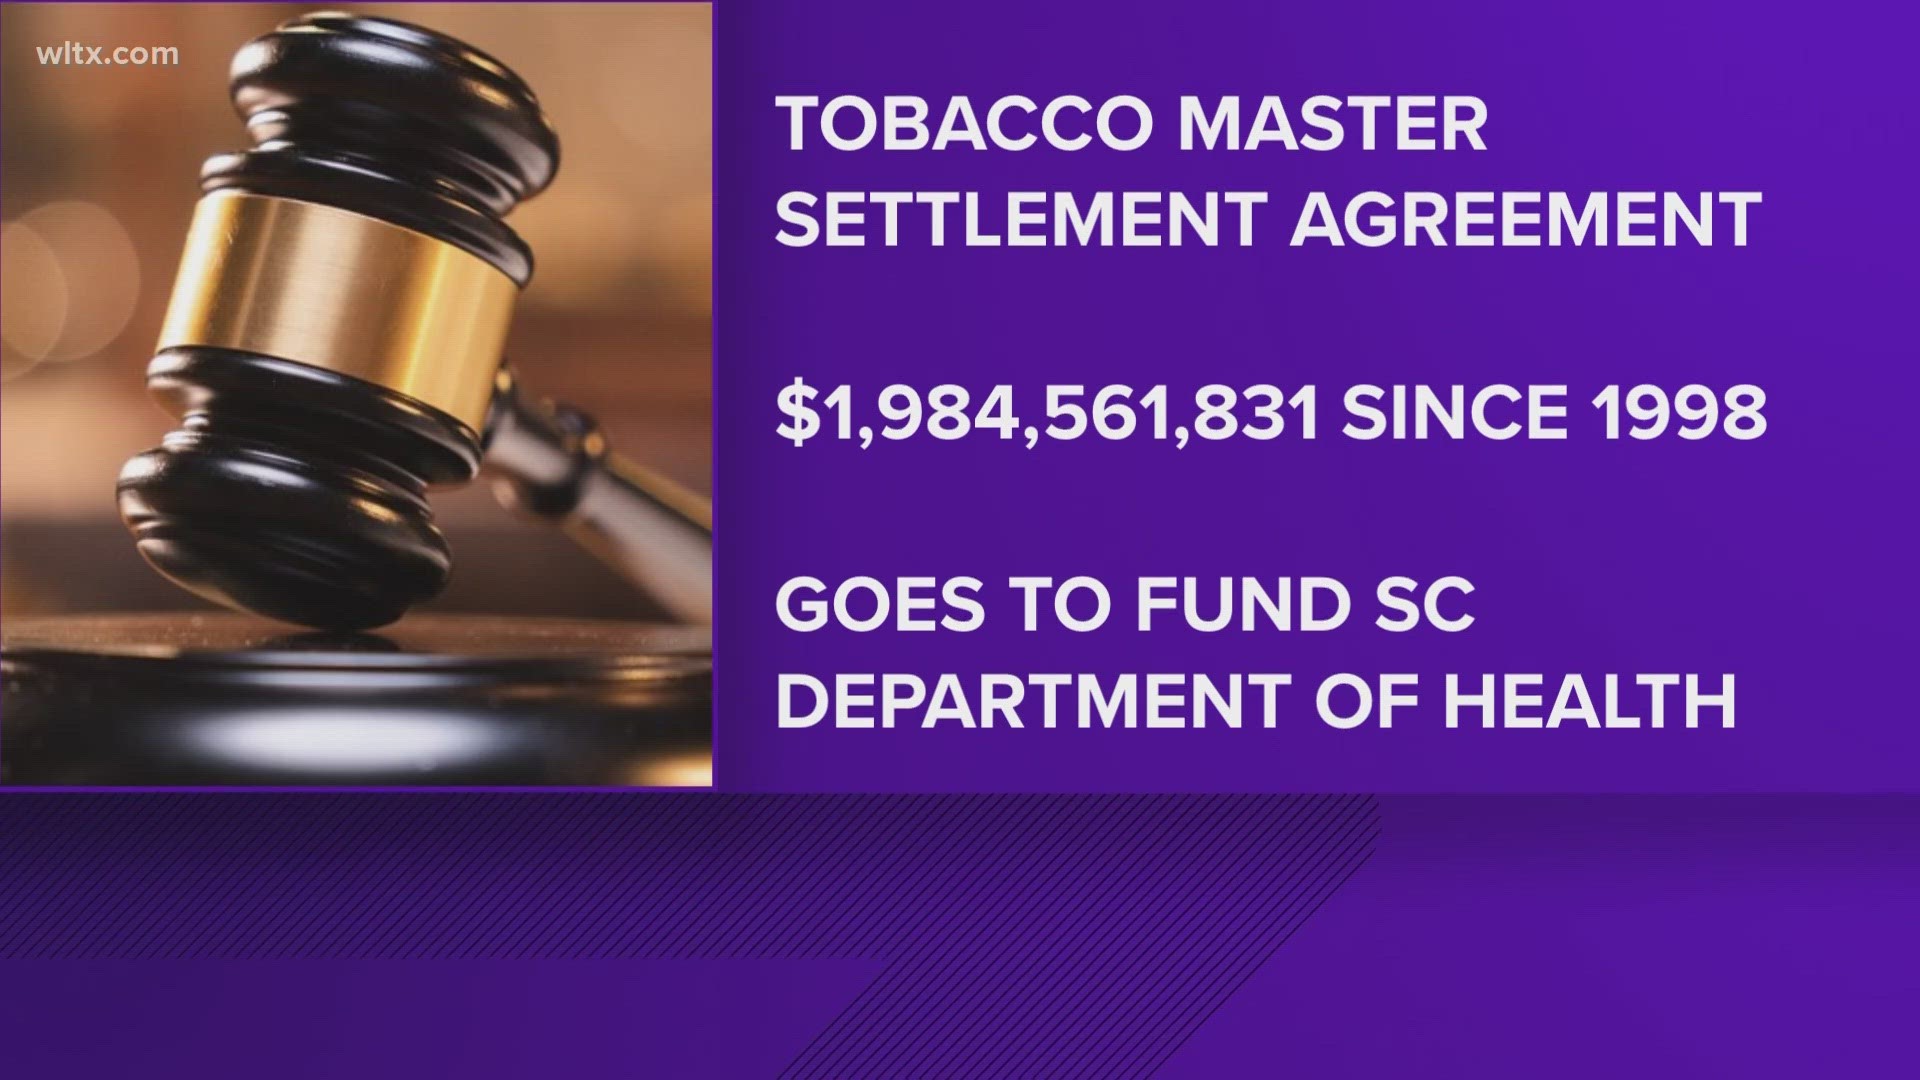 The settlement puts major restrictions on tobacco companies and provides states with annual payments to help pay for health care costs and harm due to tobacco use.